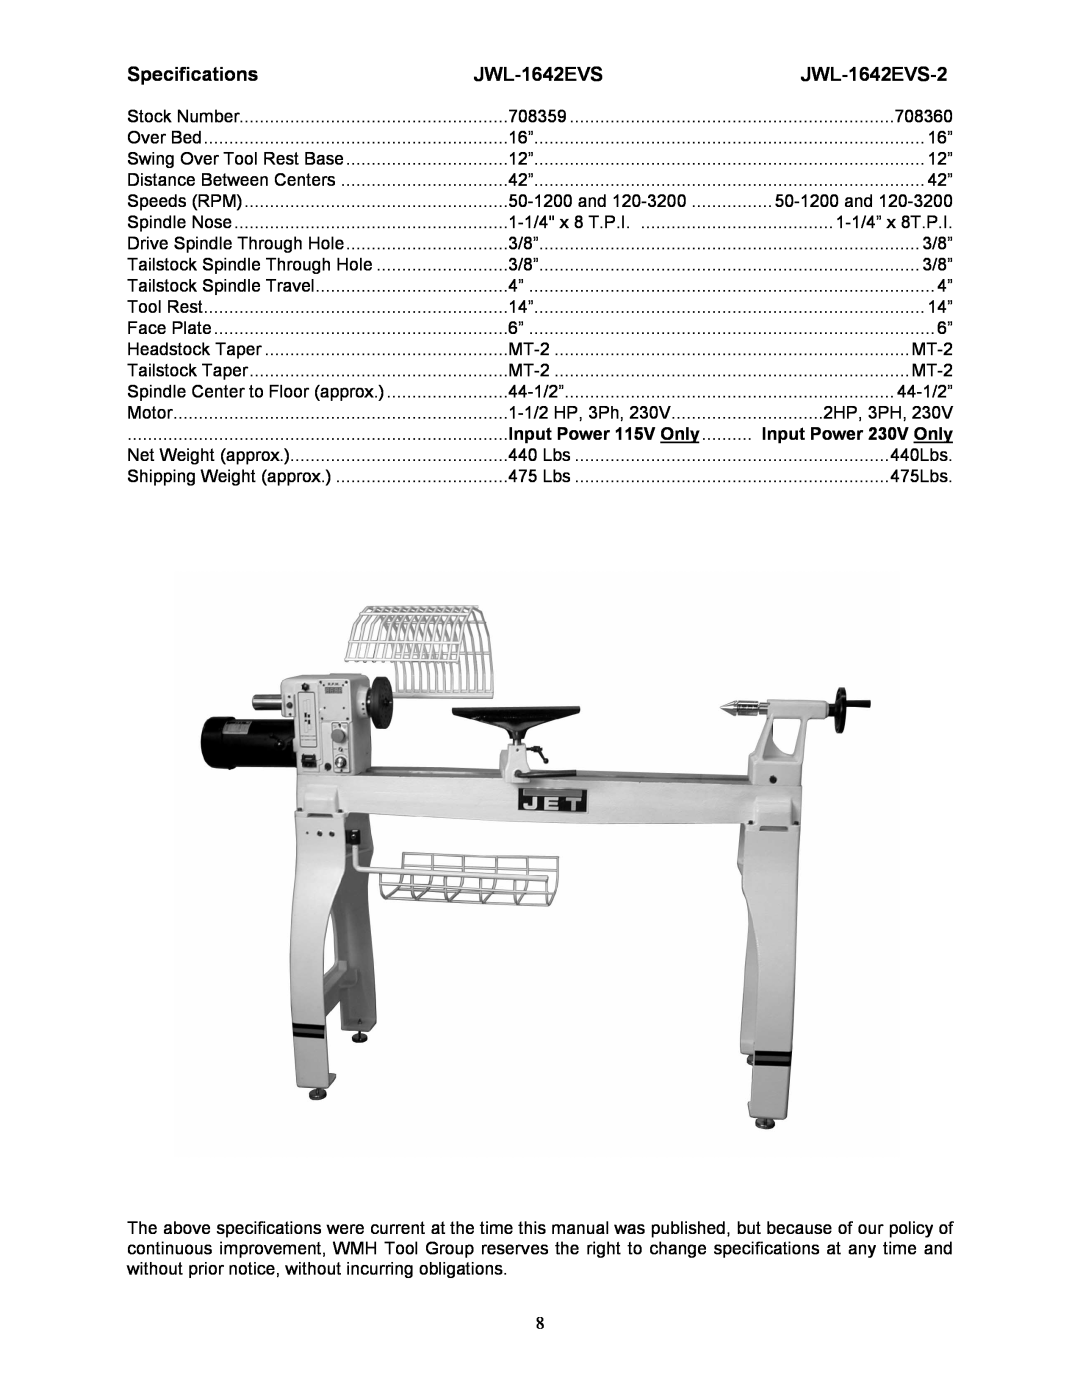 Jet Tools operating instructions Specifications, JWL-1642EVS-2, Input Power 115V Only, Input Power 230V Only 